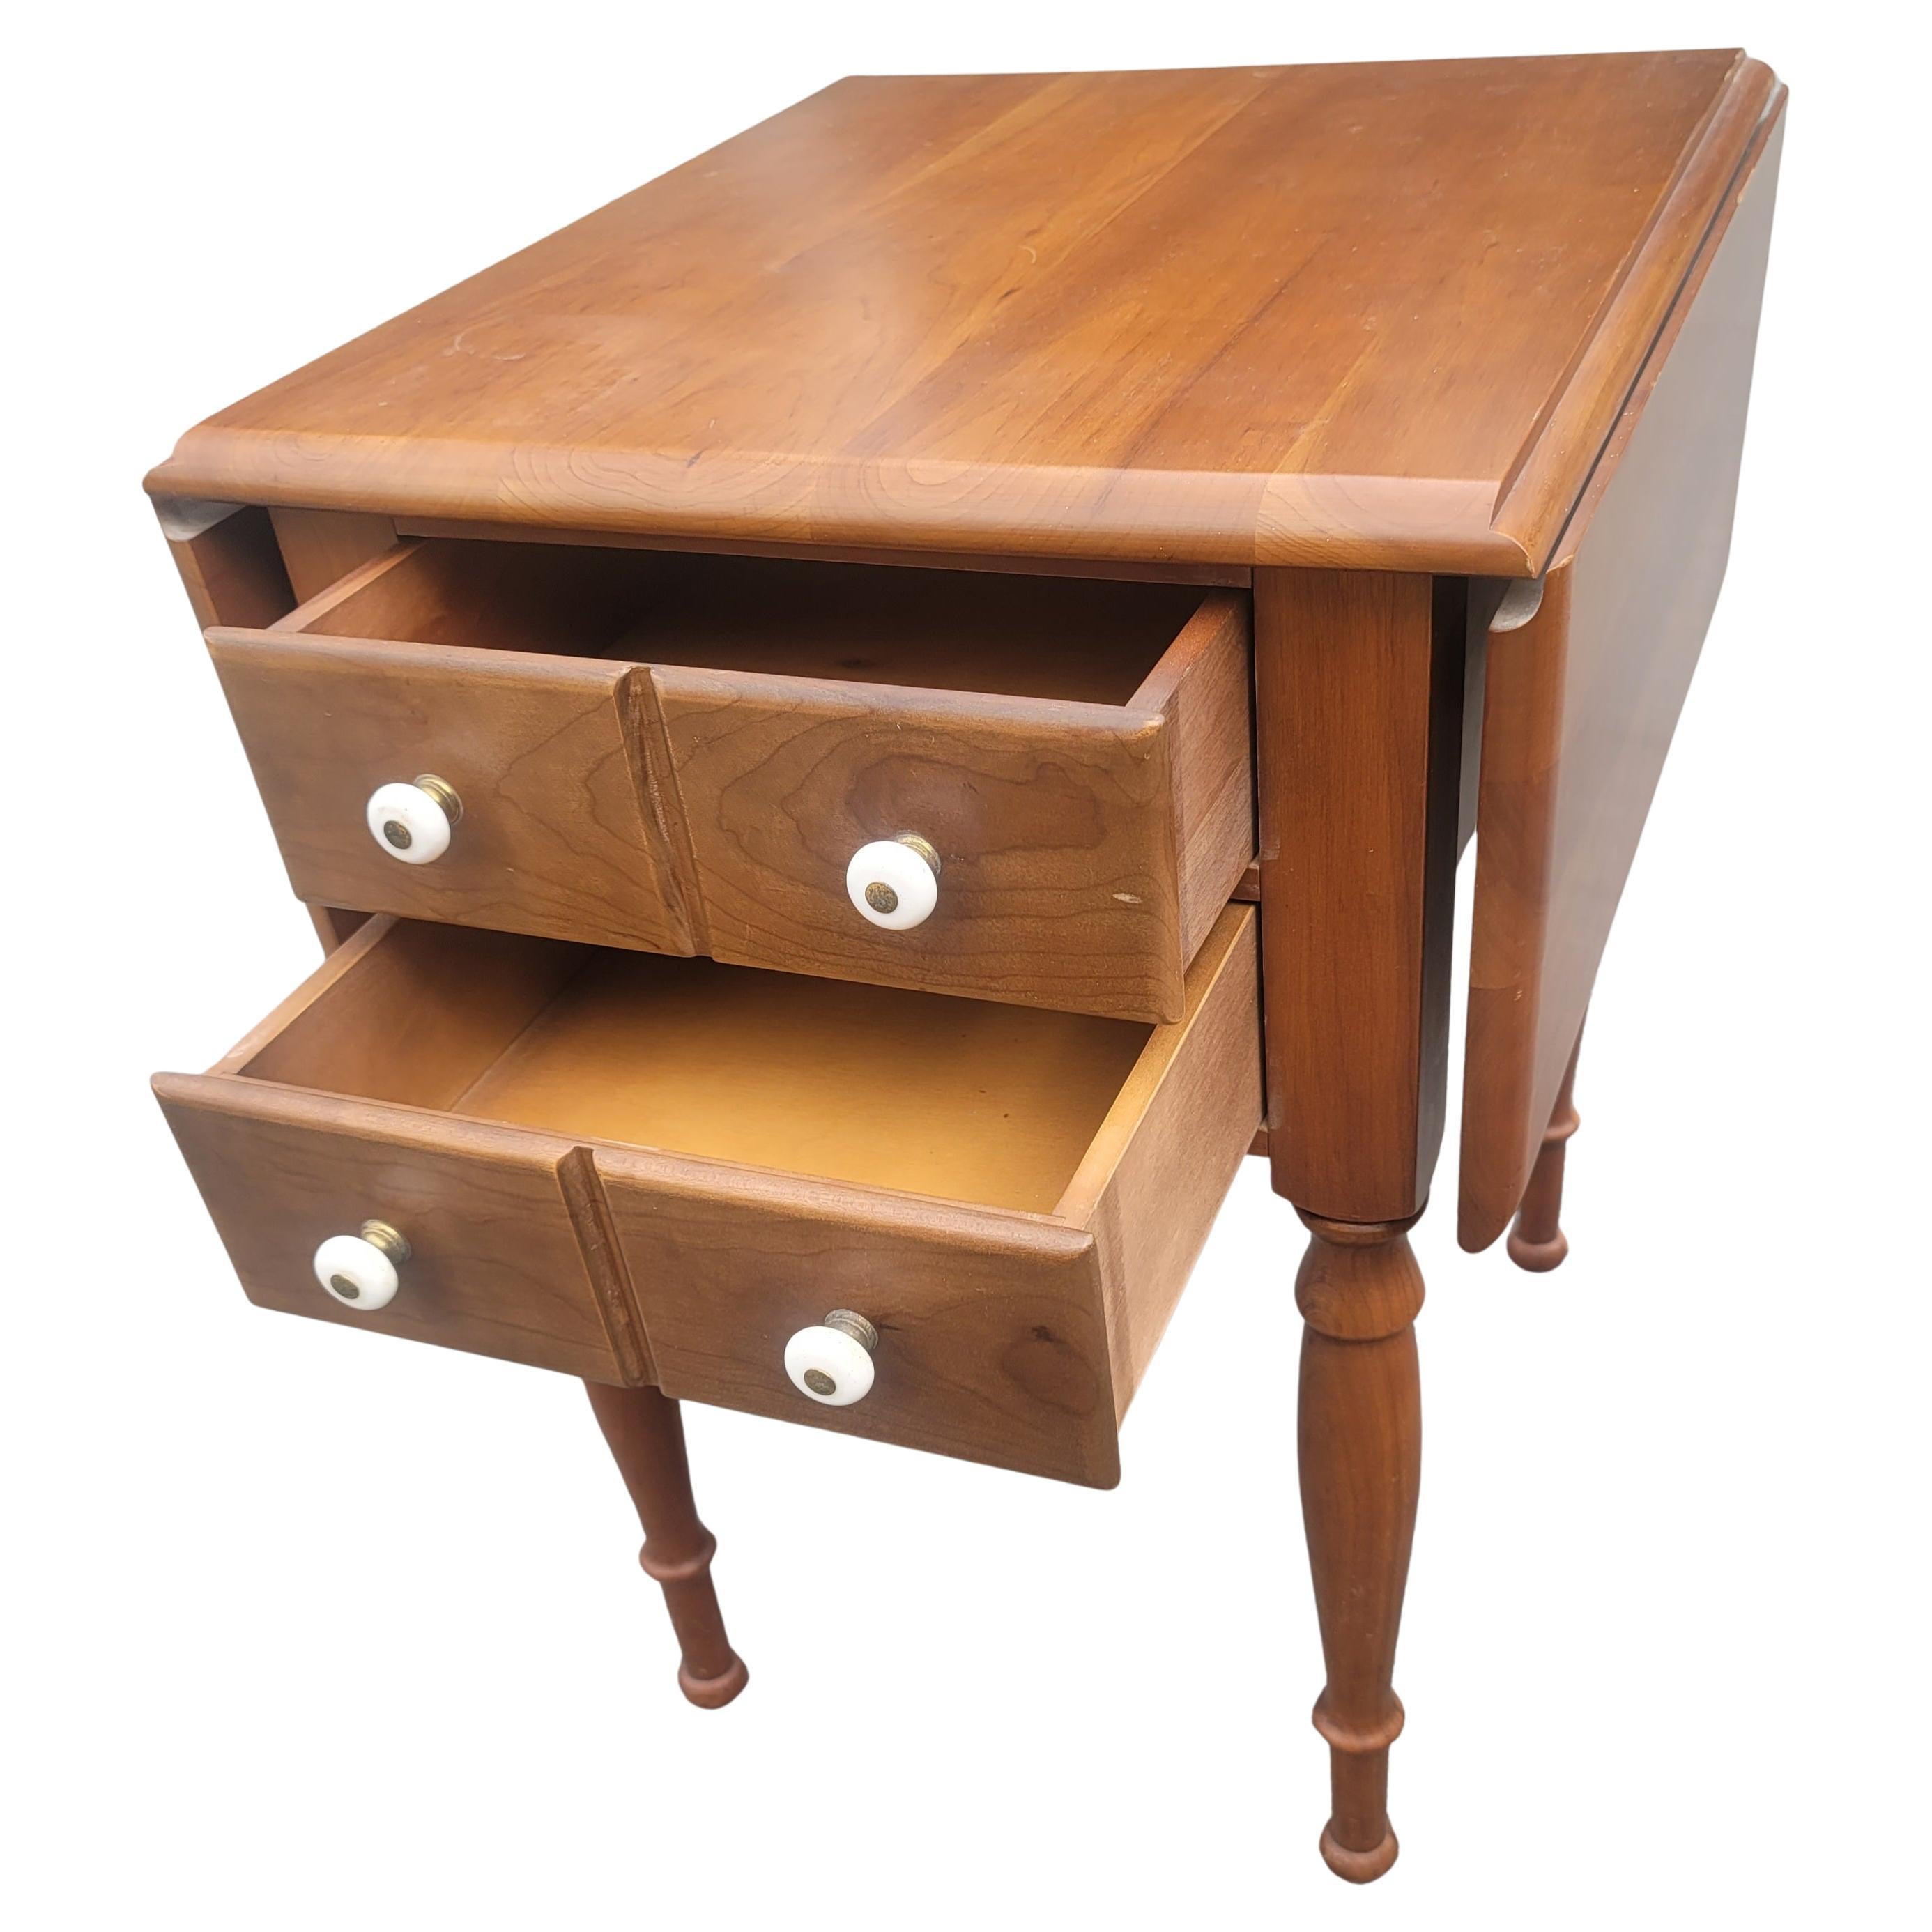 Woodwork Boring Furniture Victorian Cherry Drop-Leaf Pembroke Tables, a Pair For Sale